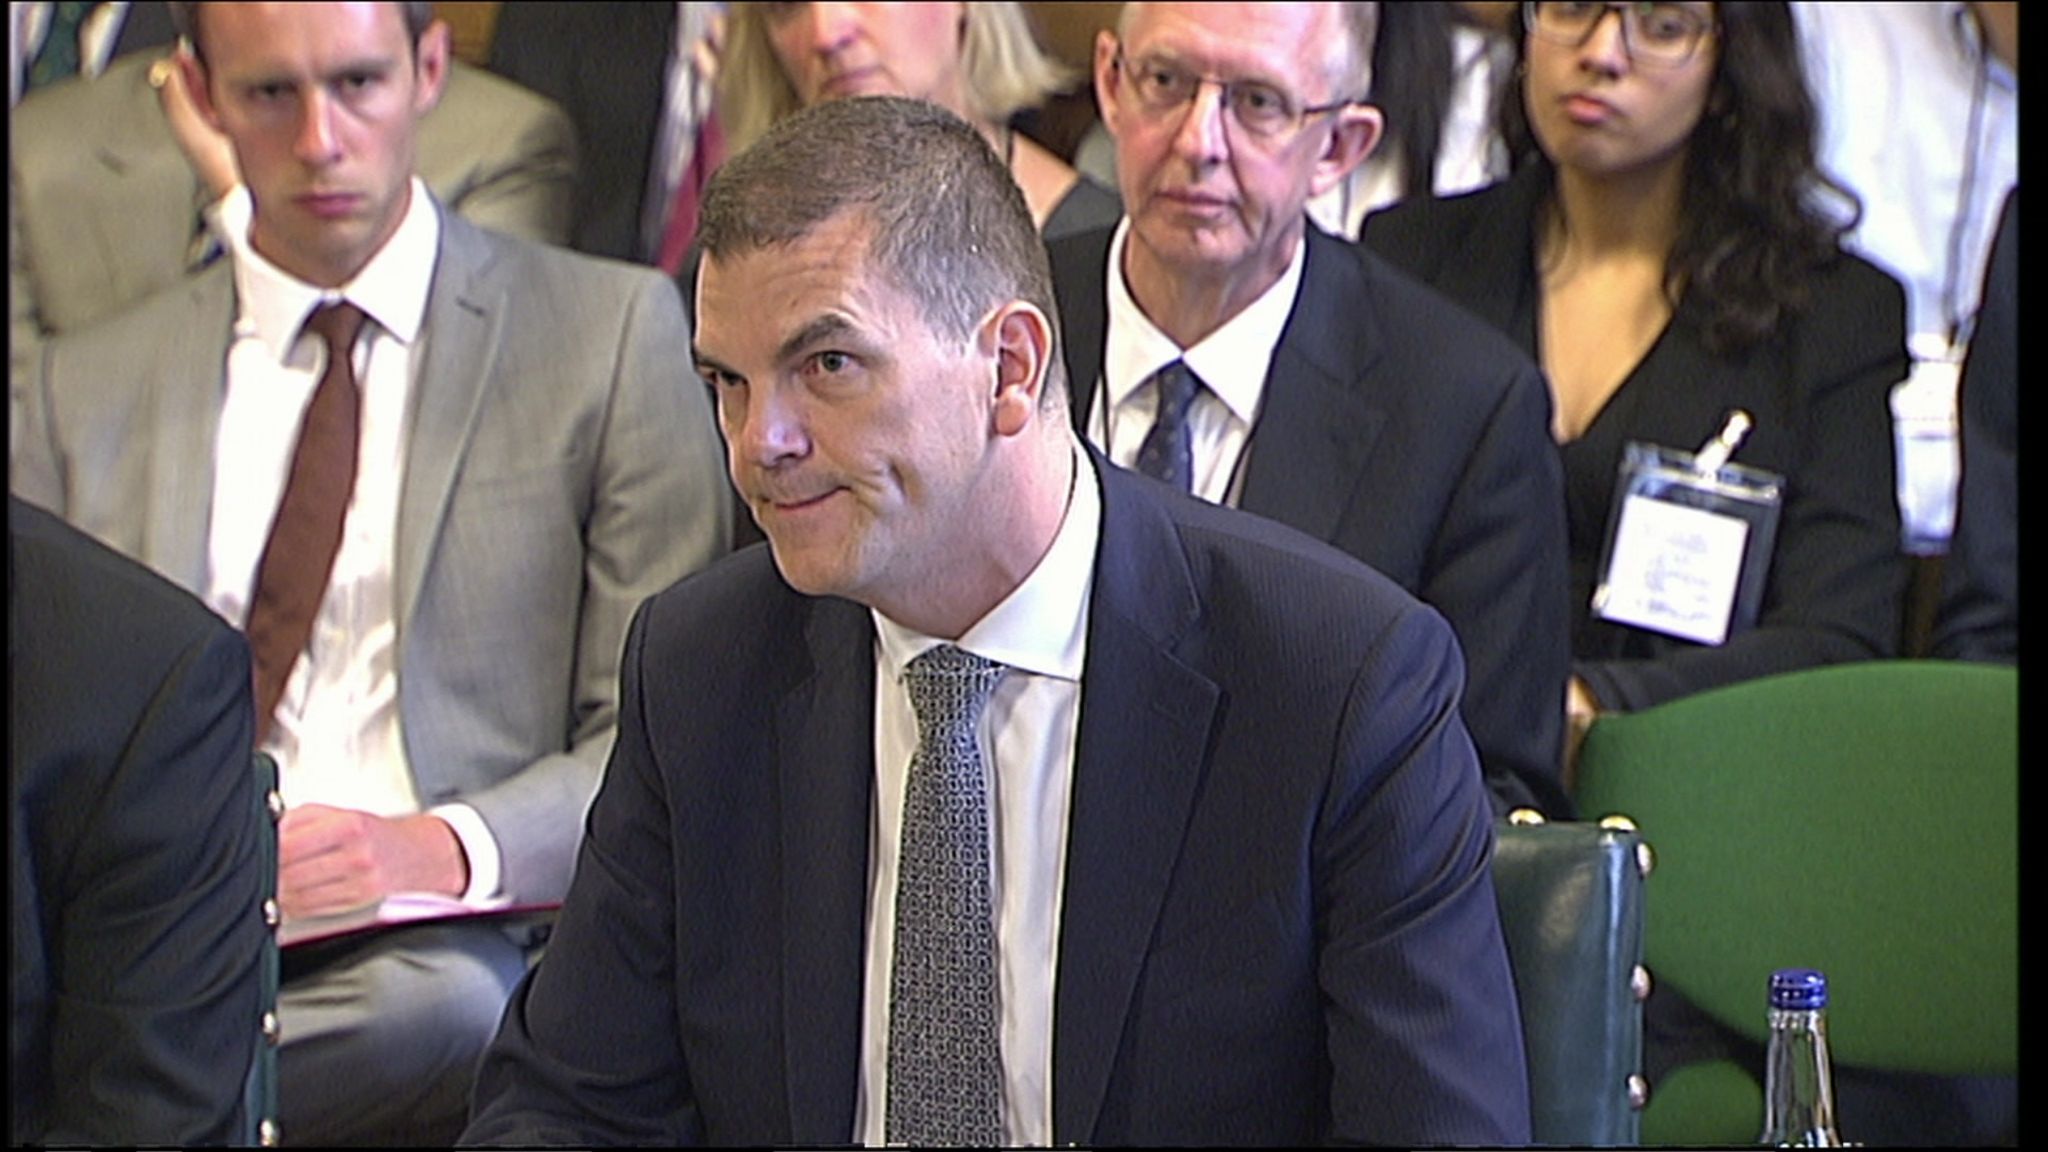 The PM's Brexit adviser Olly Robbins